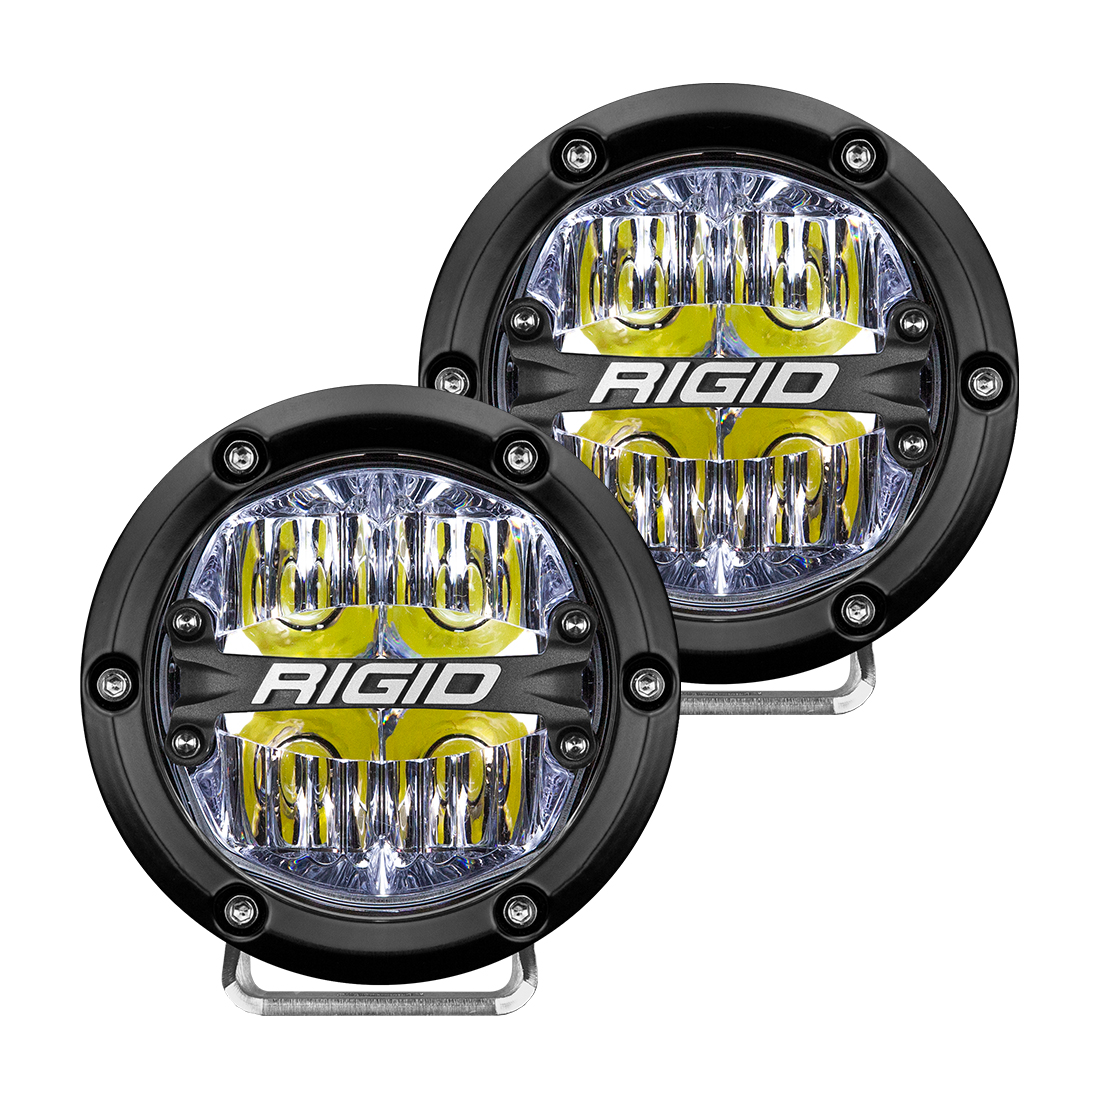 Rigid Industries 360-Series 4 Inch Led Off-Road Drive Beam White Backlight Pair